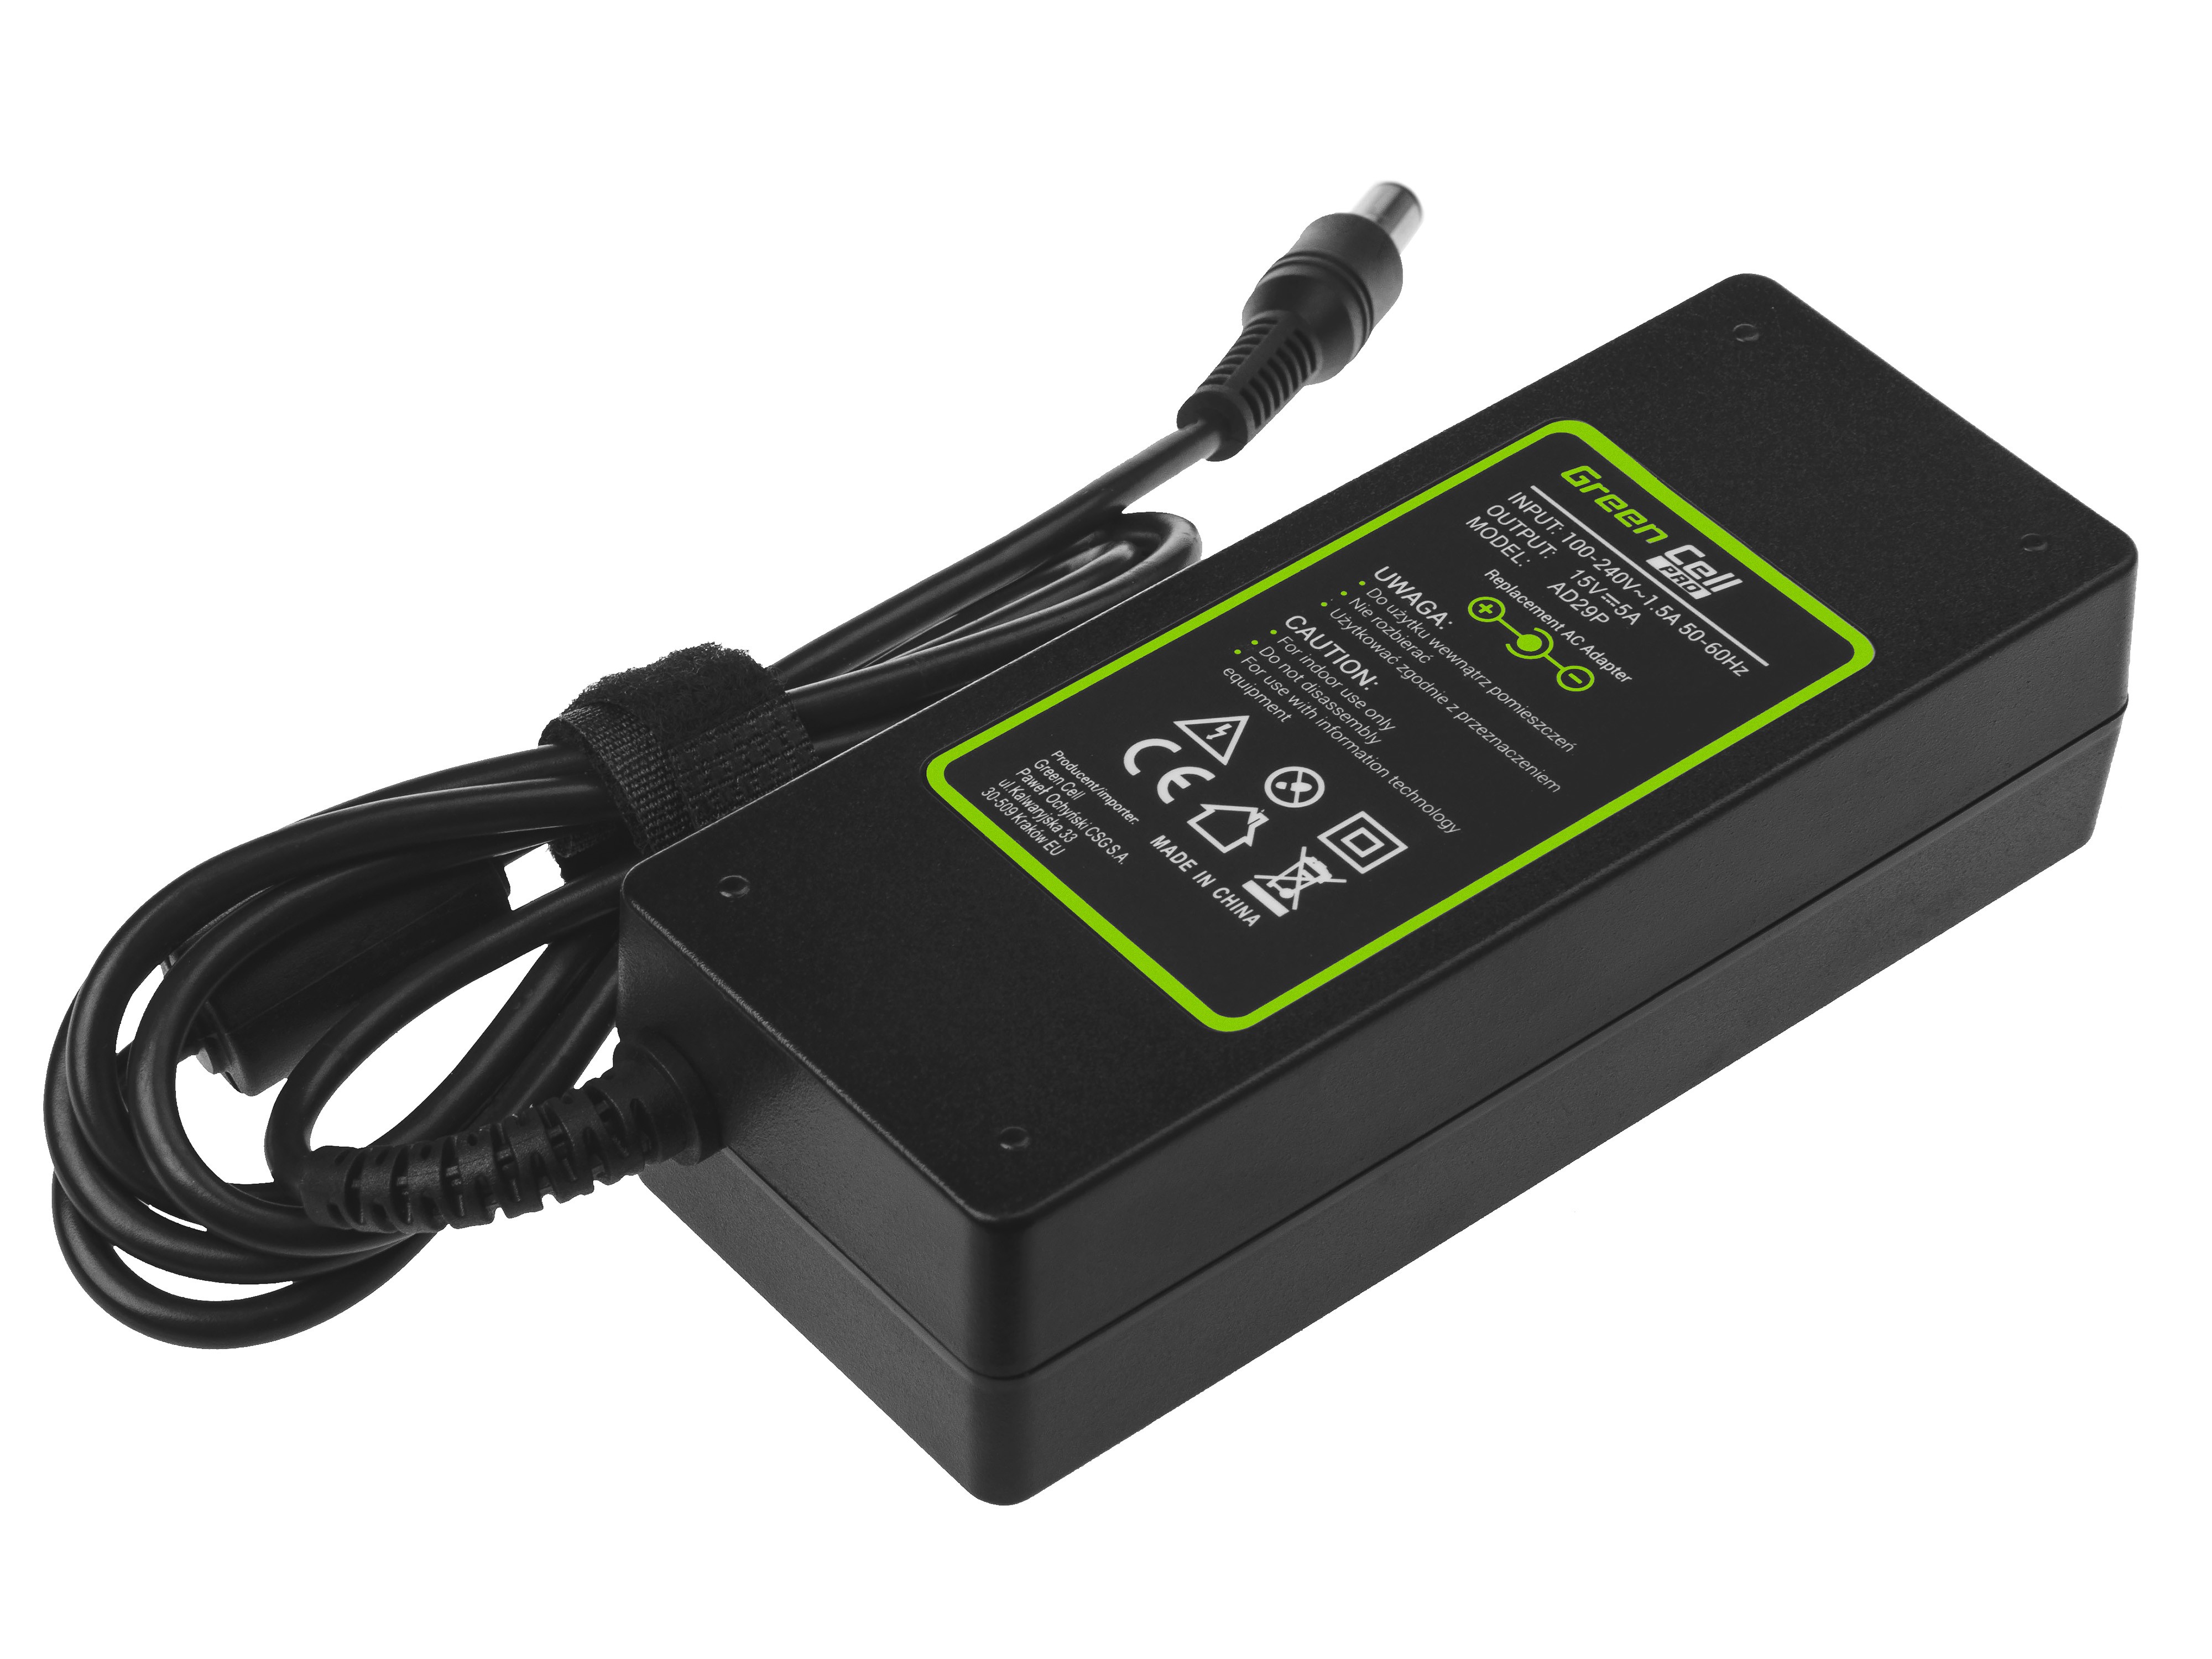 PRO Oplader  AC Adapter voor Toshiba Tecra A10 A11 M11 Satellite A100 P100 Pro S500 15V 5A 75W